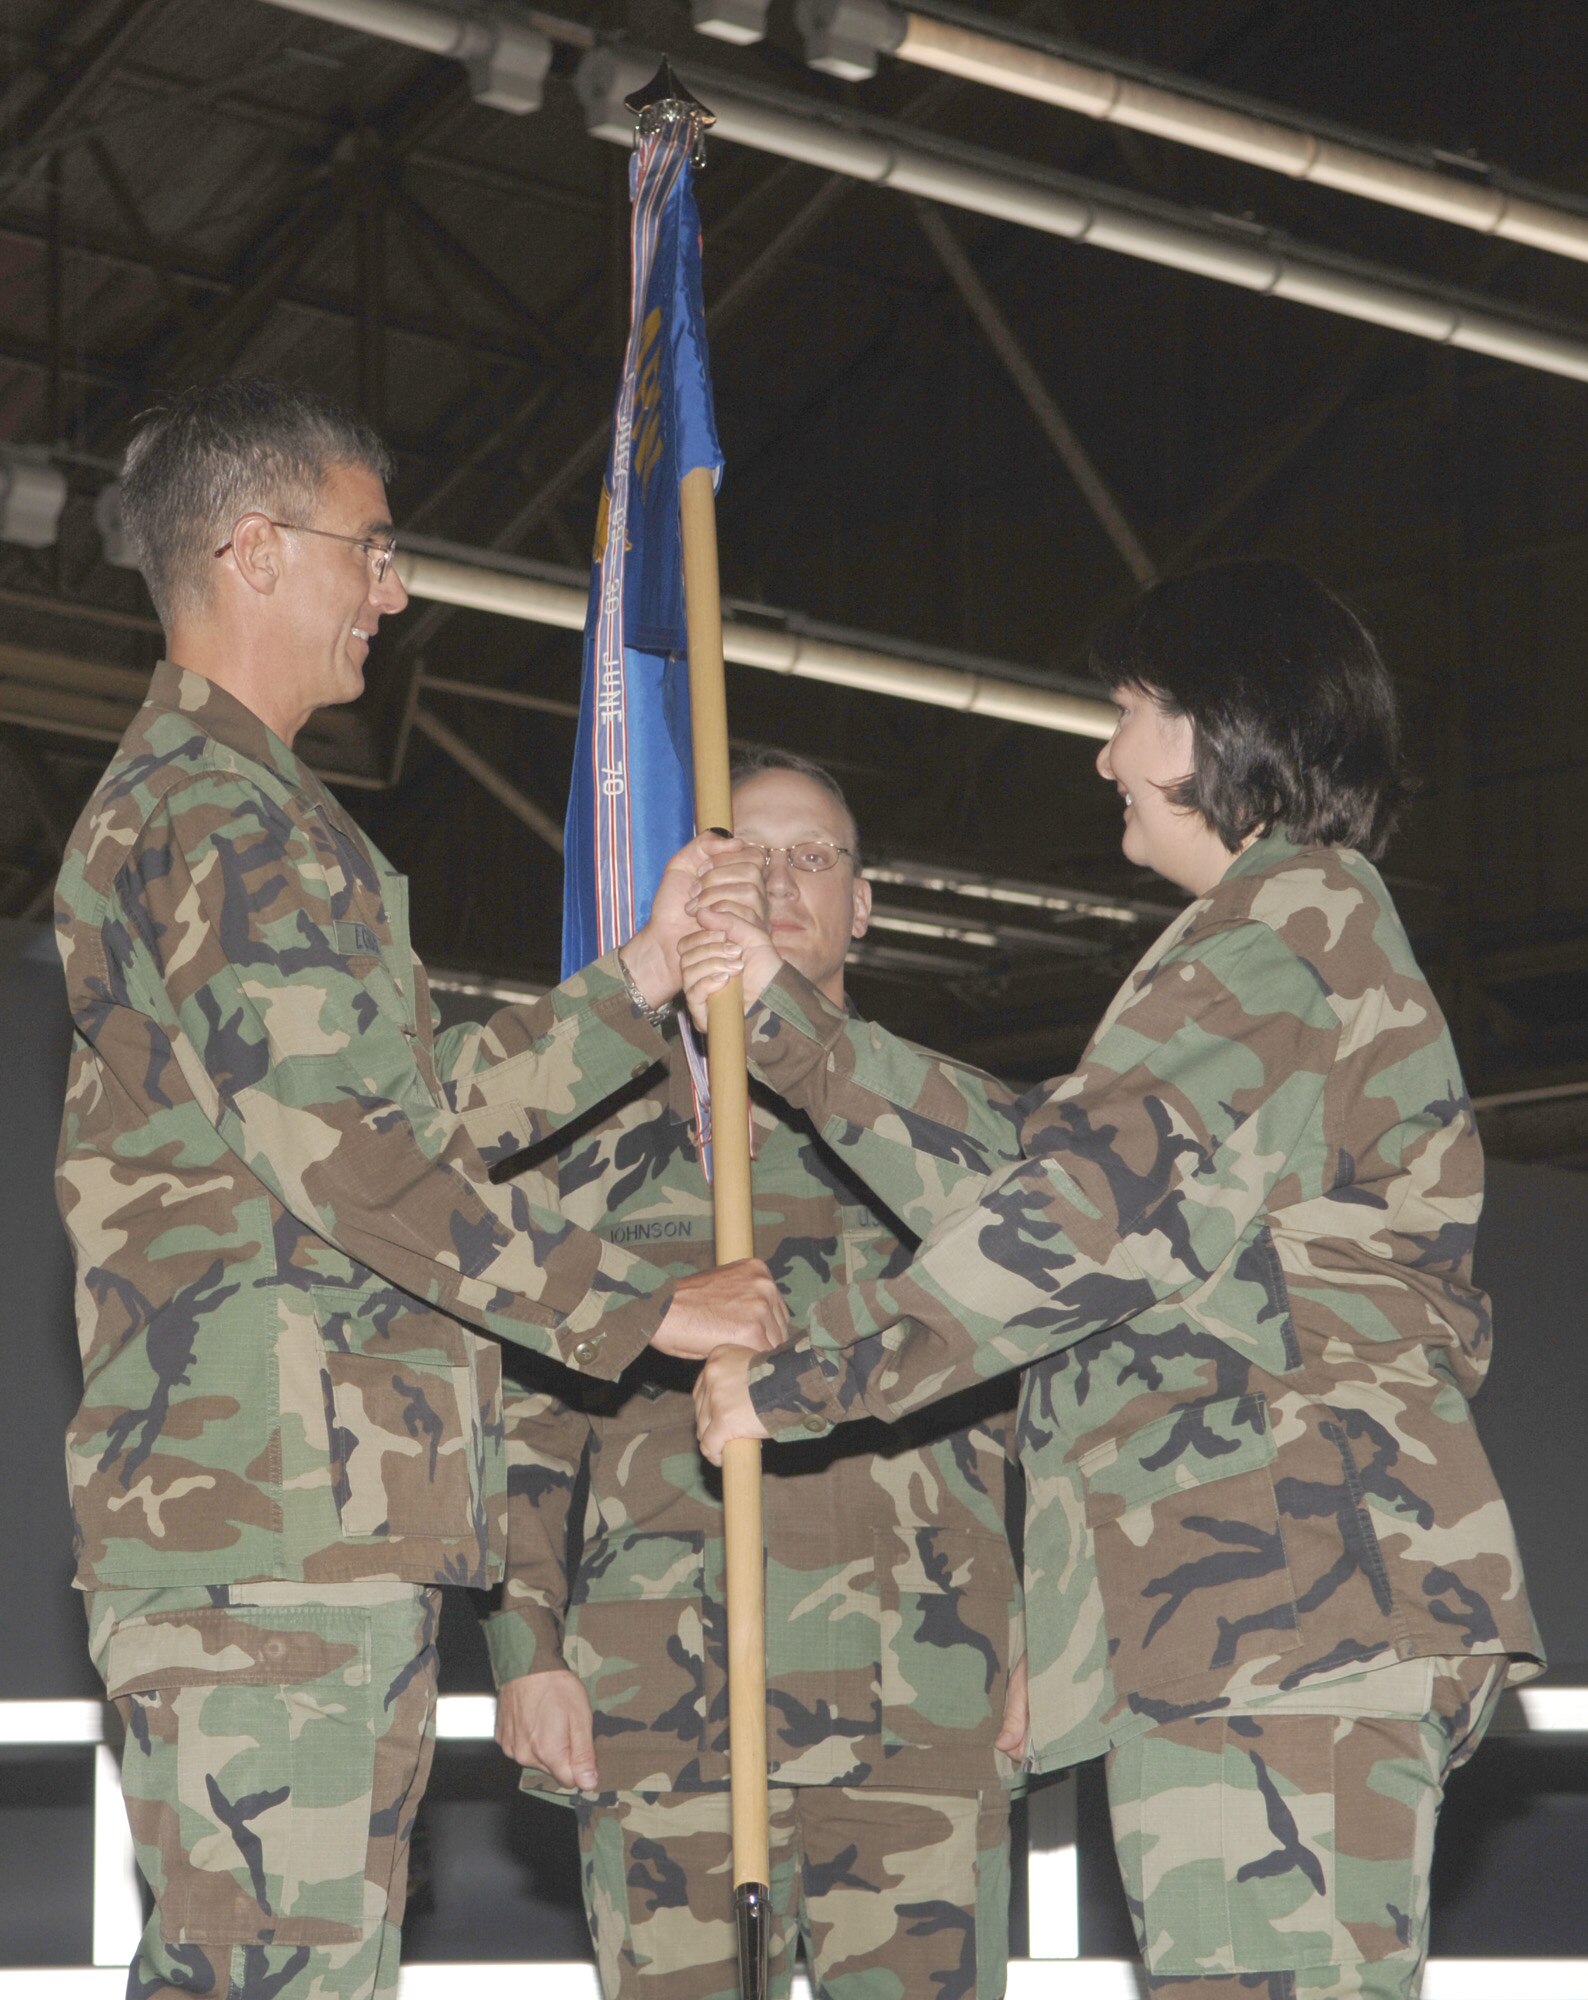 FAIRCHILD AIR FORCE BASE, Wash. – Maj. Christine Byers, the new 92nd Maintenance Squadron commander, receives the squadron flag from Col. Robert Egbert, 92nd Maintenance Group commander, during the change-of command ceremony Aug. 9. Maj. Byers follows in the footsteps of outgoing squadron commander Lt. Col. Matthew Mangan. (U.S. Air Force photo / Senior Airman Chad Watkins)